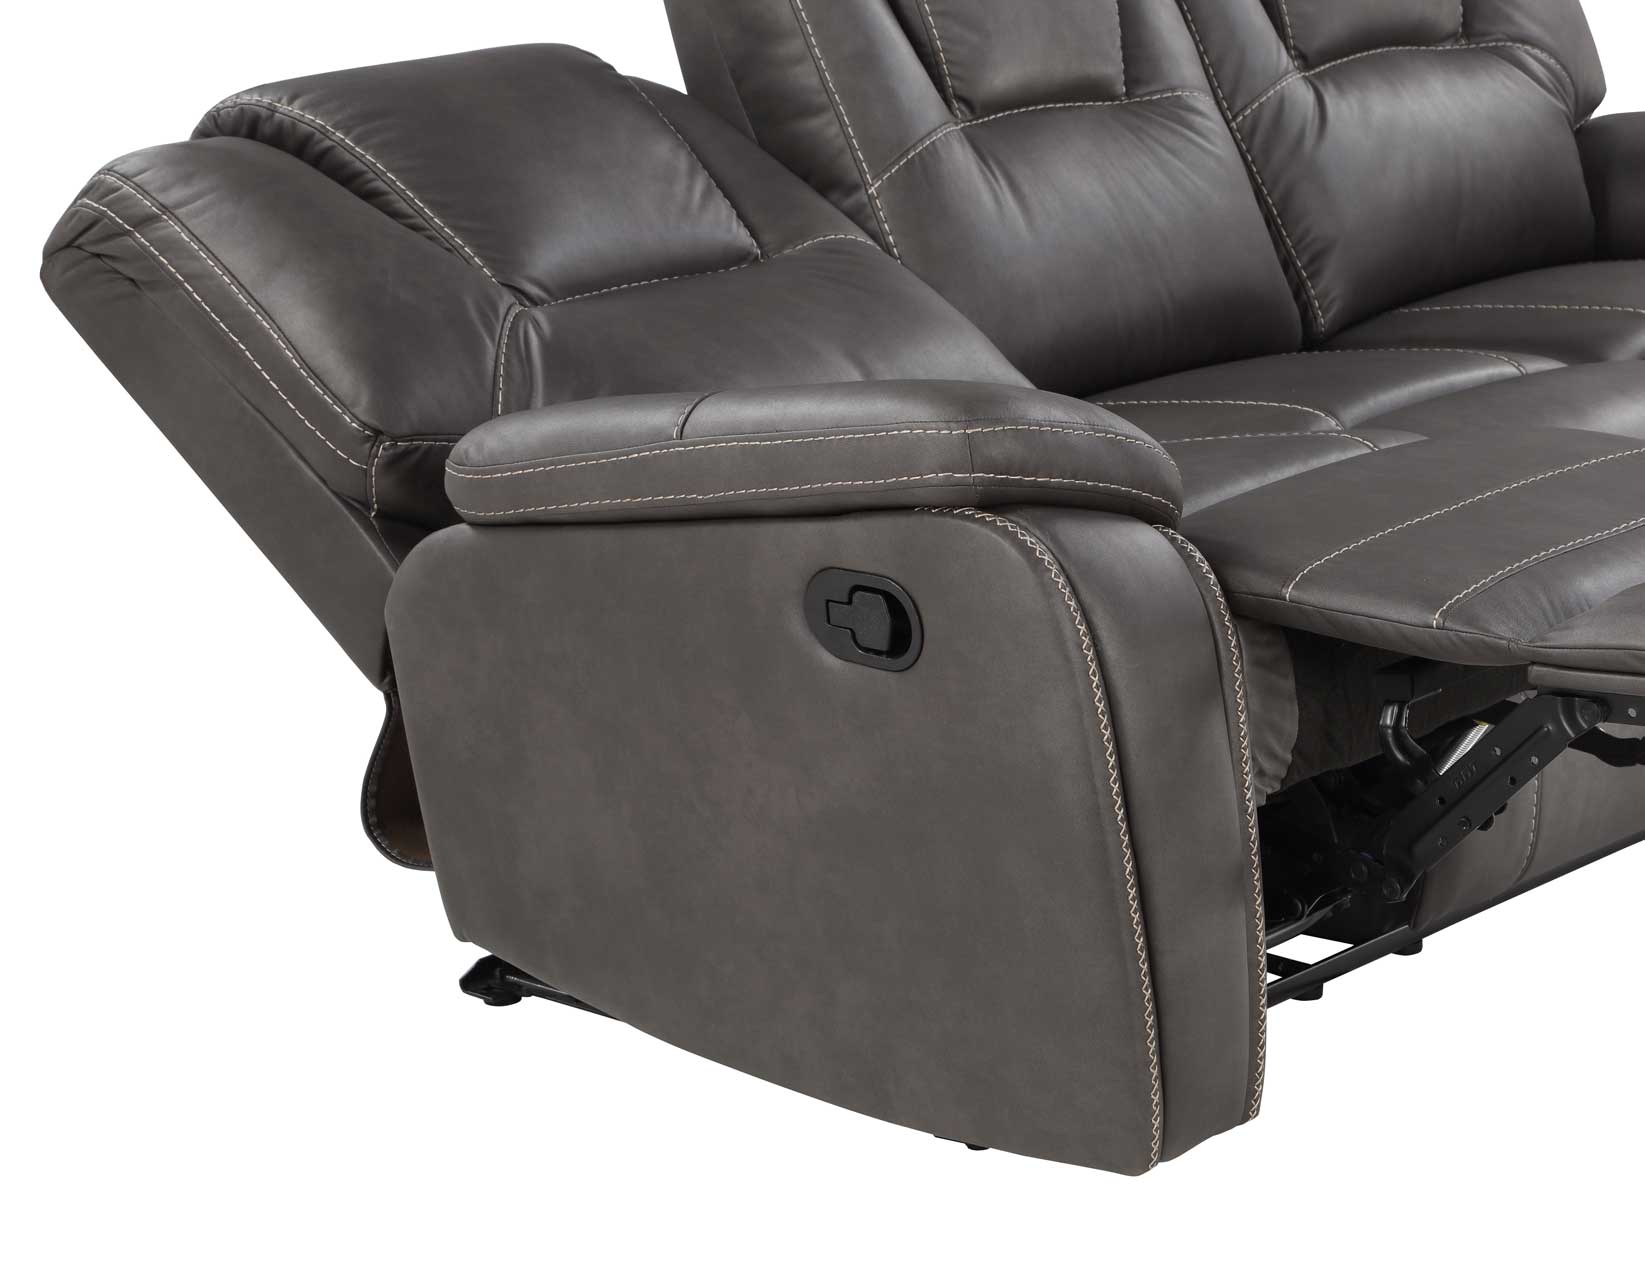 Katrine 3-Piece Manual Motion Set, Charcoal (Sofa, Loveseat & Recliner) from Steve Silver